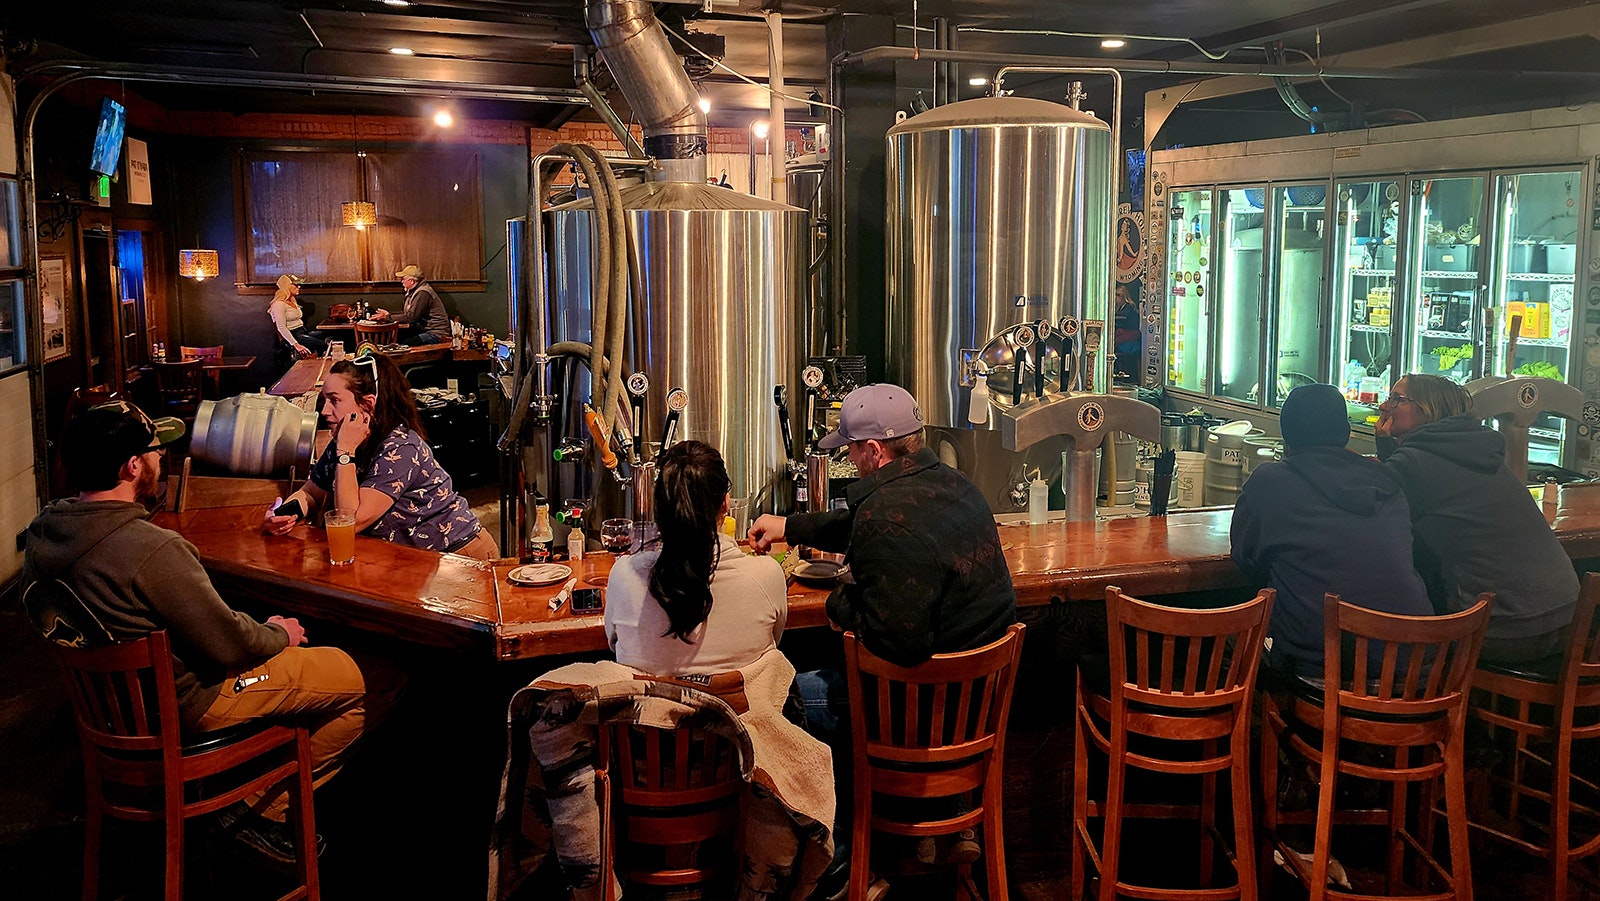 The relaxed neighborhood feel at Pat's Brew House brings in many regular customers.